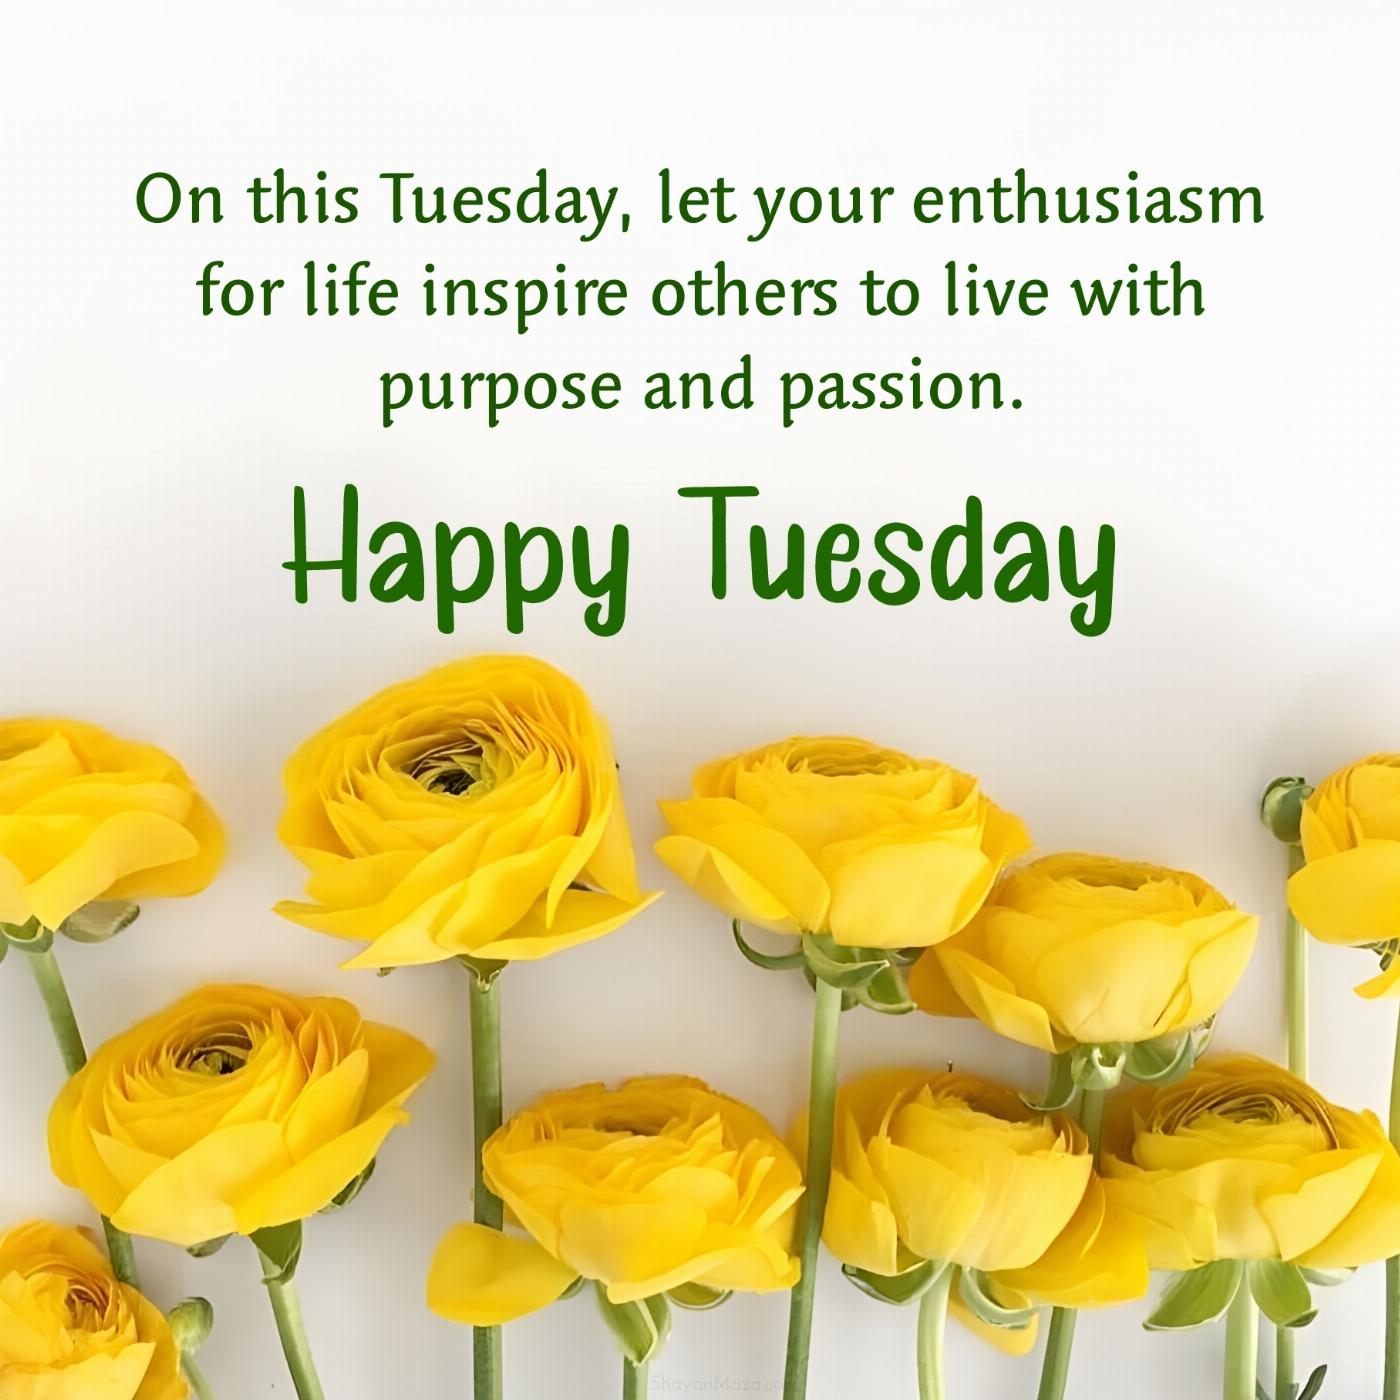 On this Tuesday let your enthusiasm for life inspire others